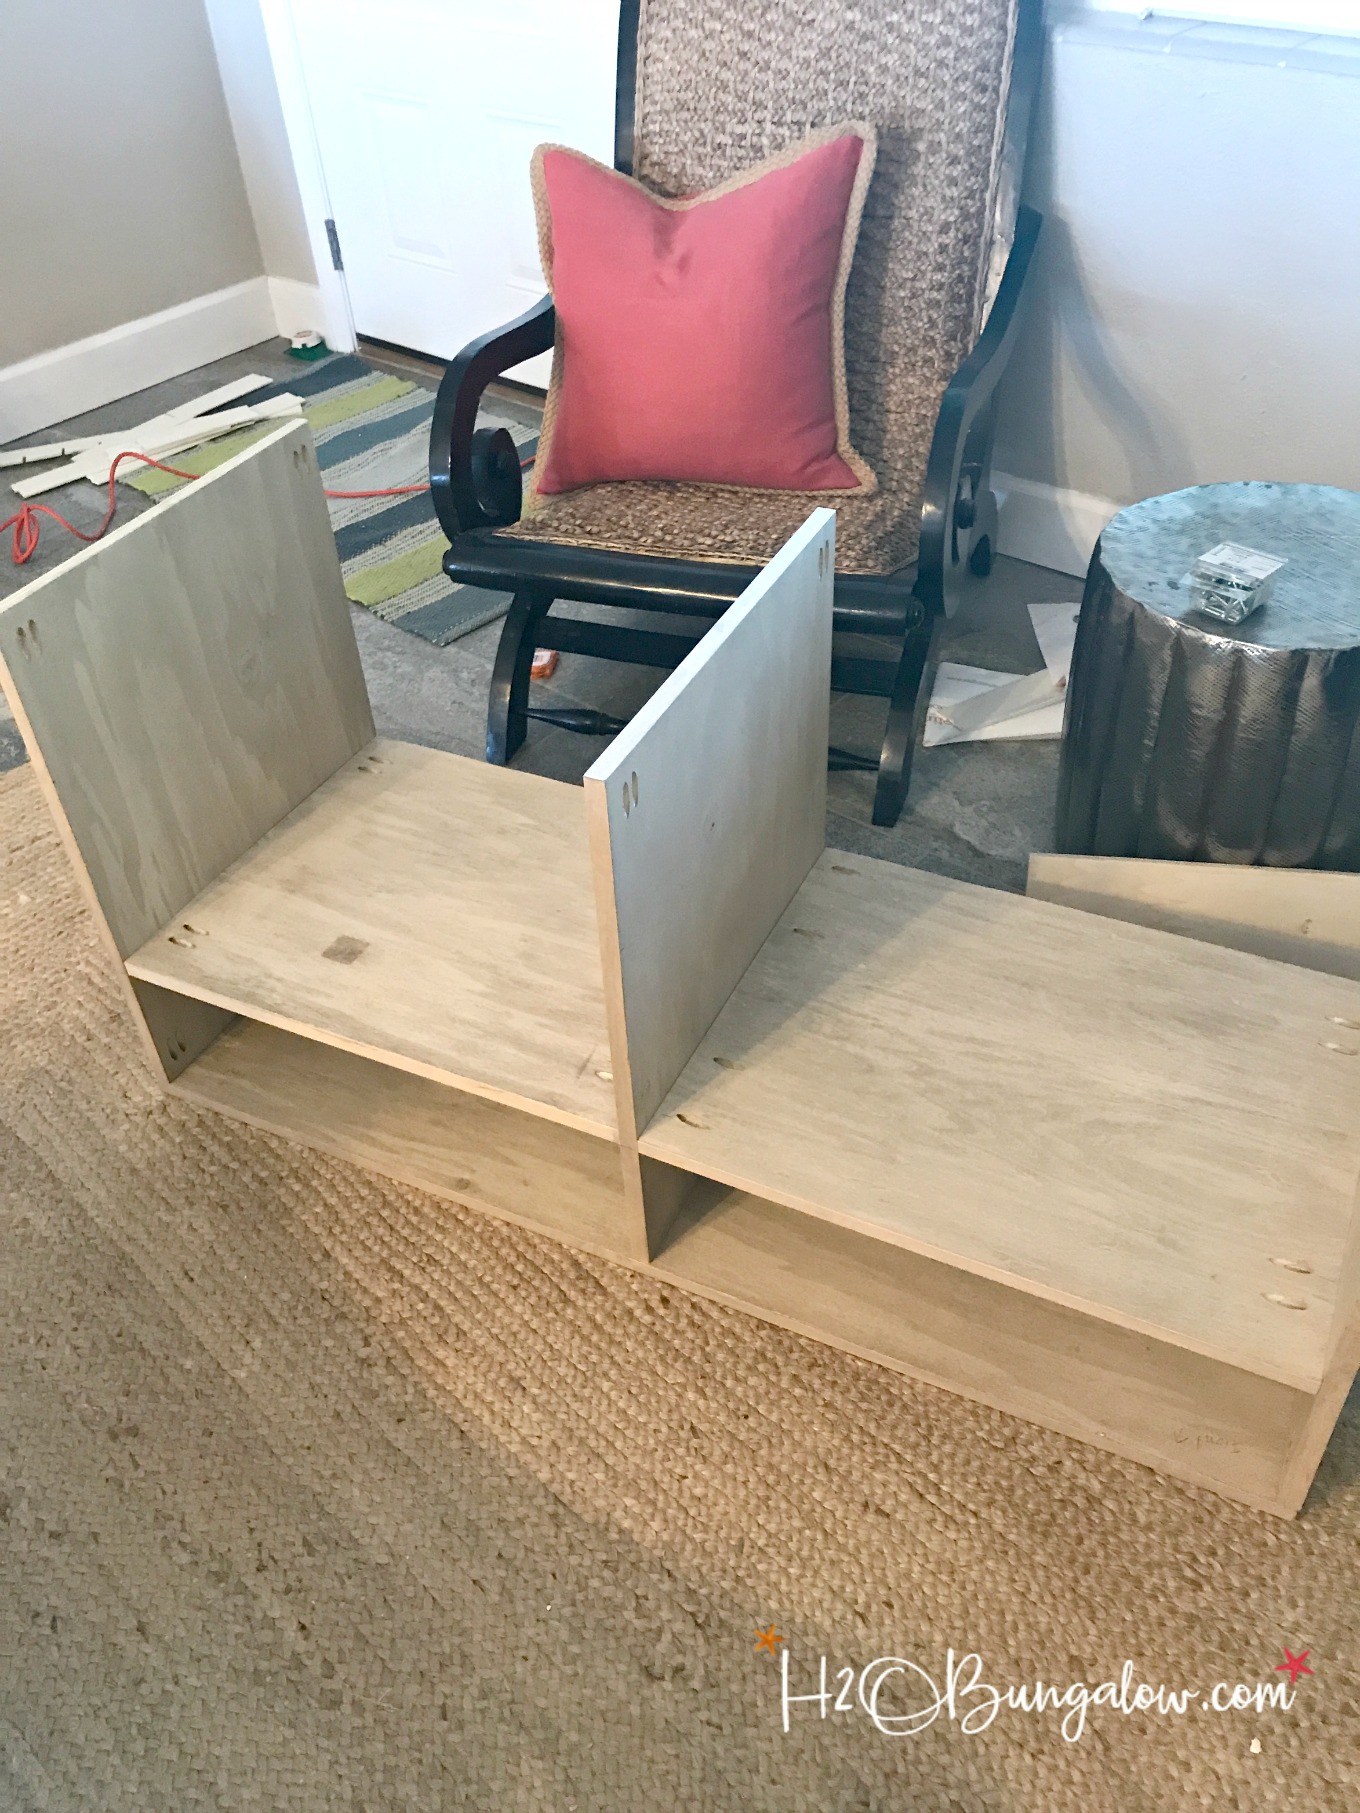 DIY media console with free plans tutorial. Build a media cabinet to hold electronics, add the matching wall mounted TV cabinet. Looks great in small spaces